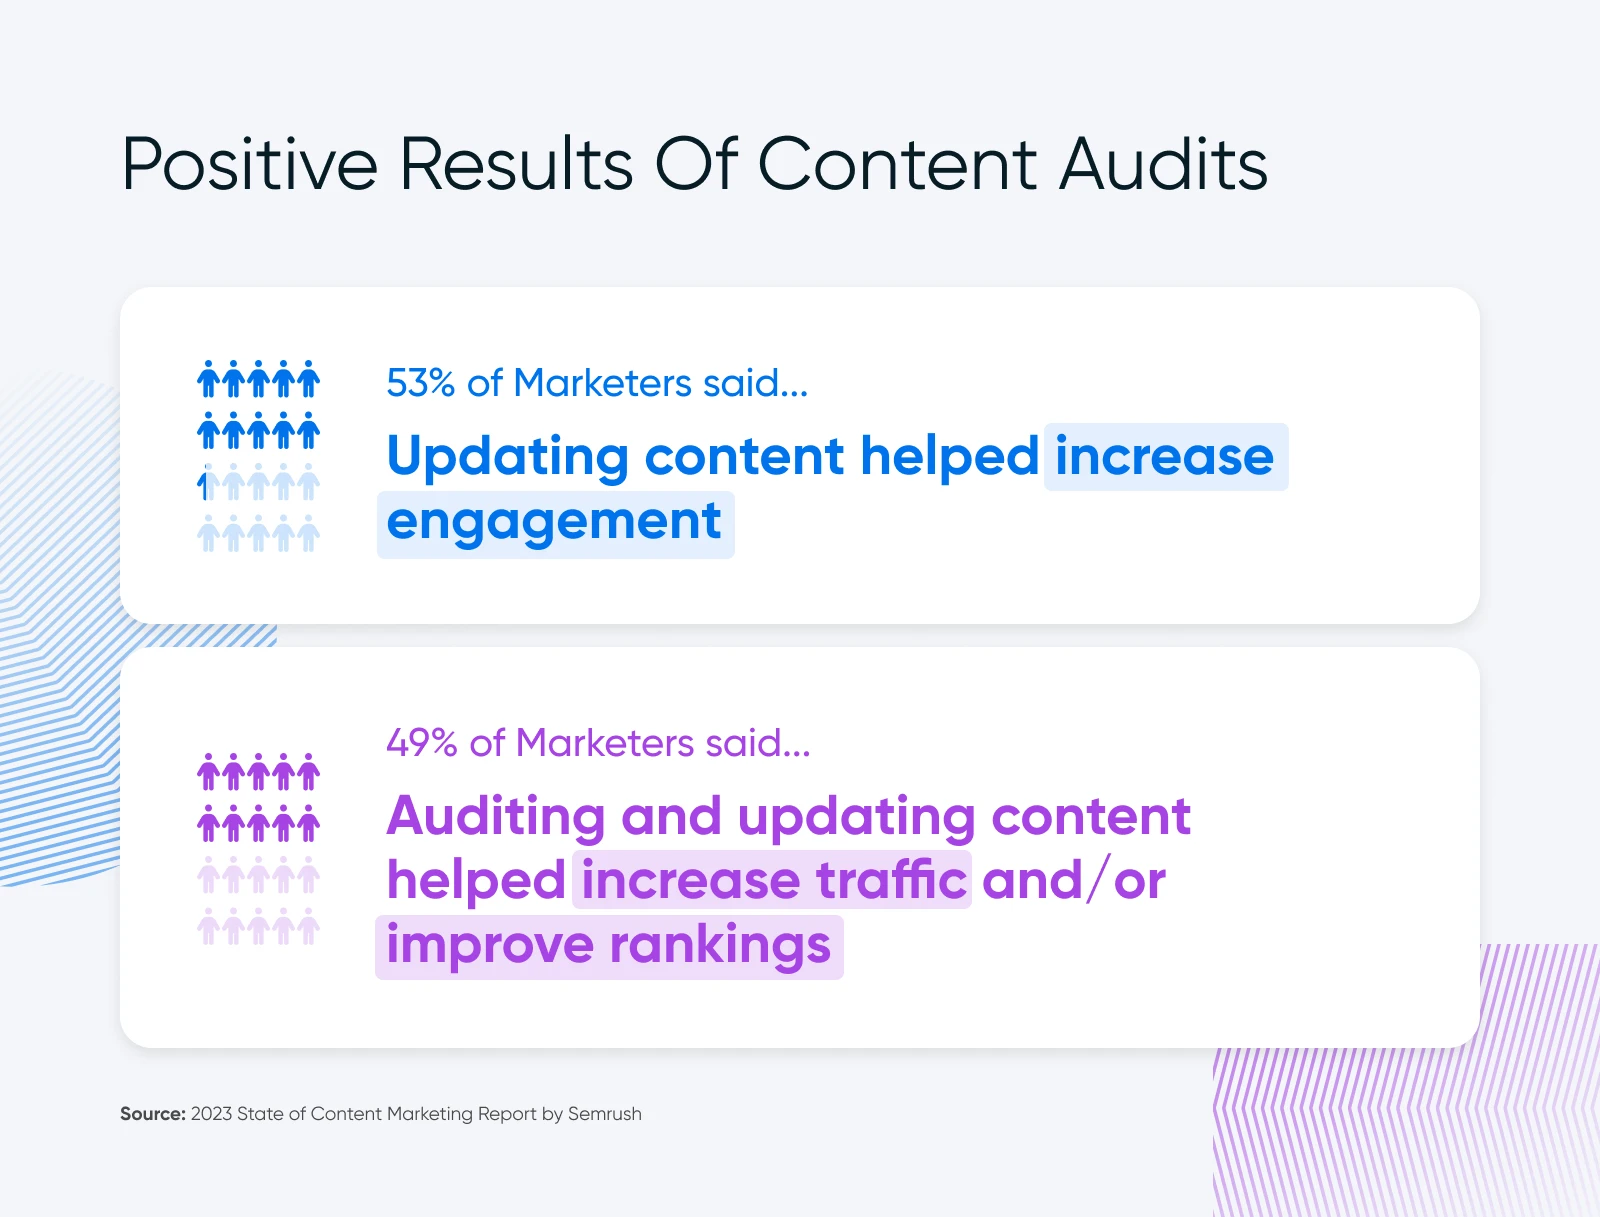 Charts showing 53% of marketers say updating content increases engagement, while 49% say it boosts traffic and rankings.